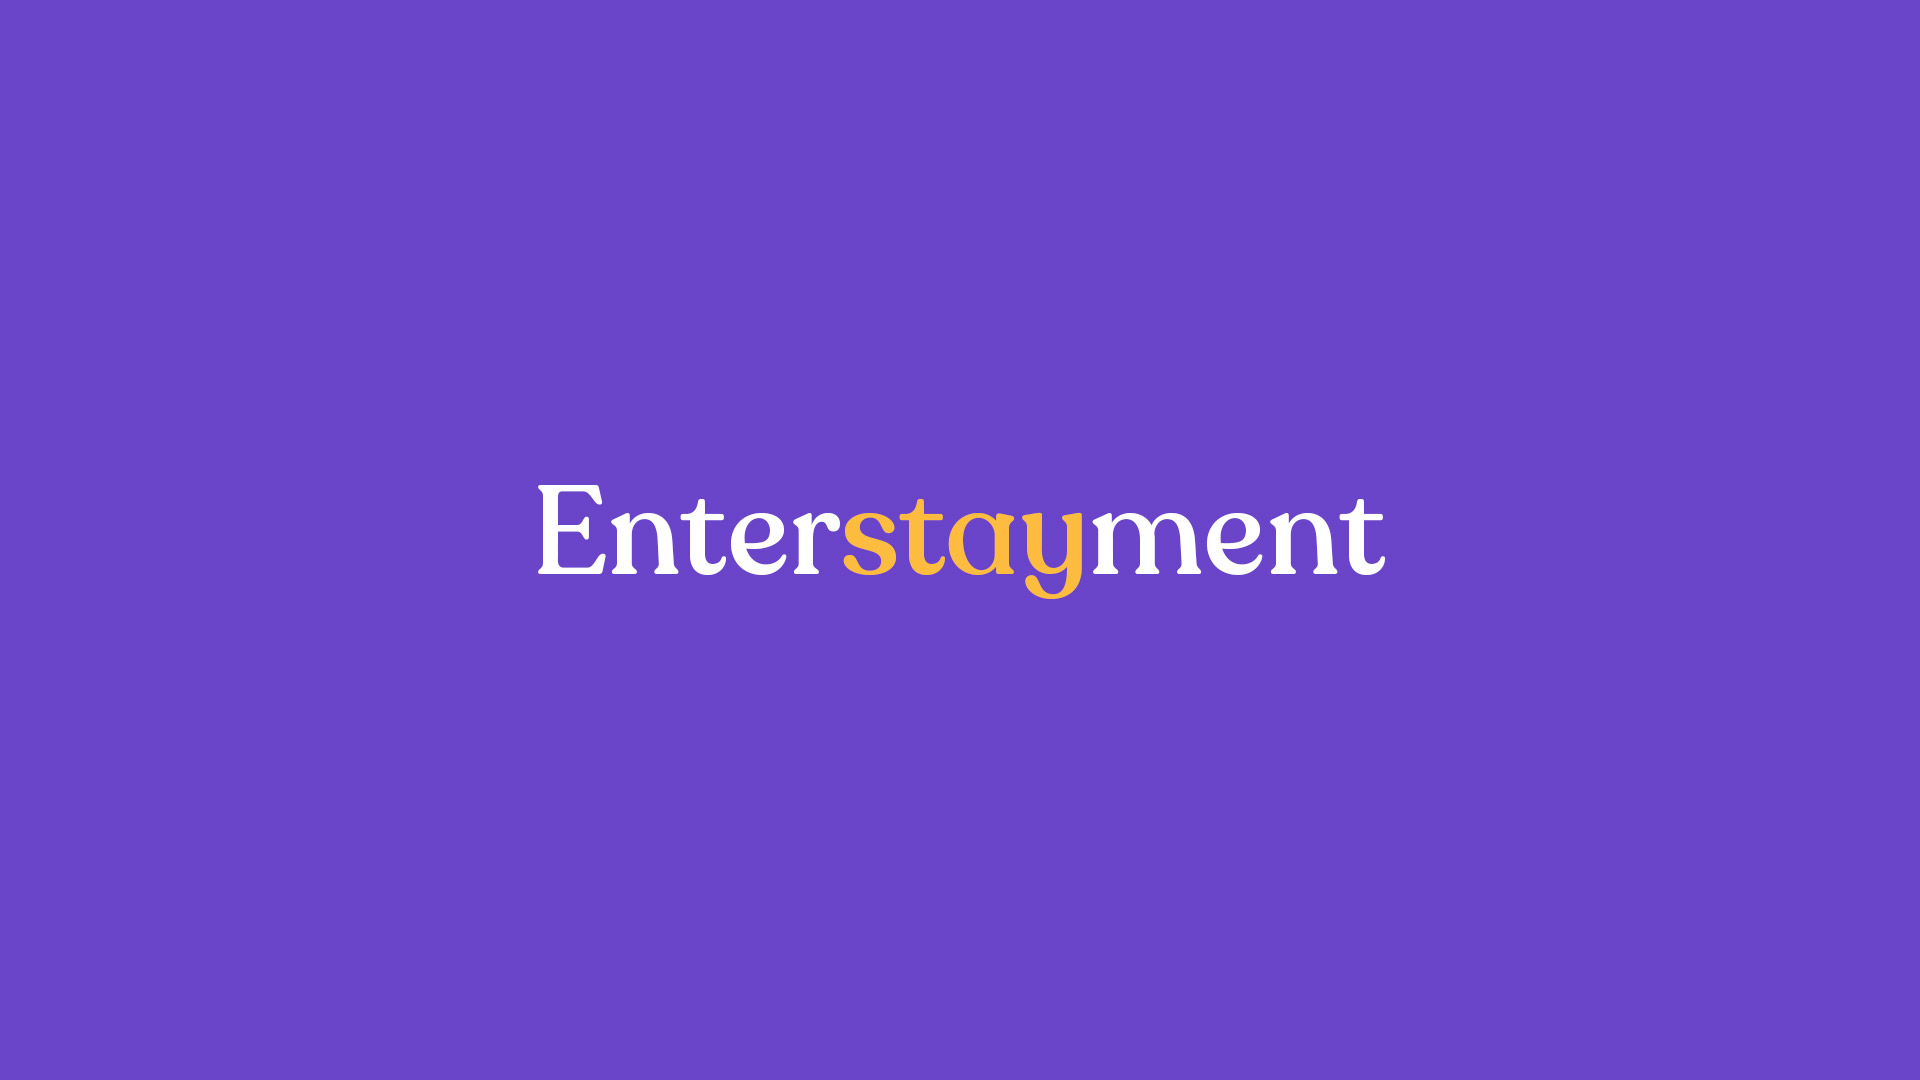 Enterstayment tagline for E-Central Hotel in Downtown Los Angeles